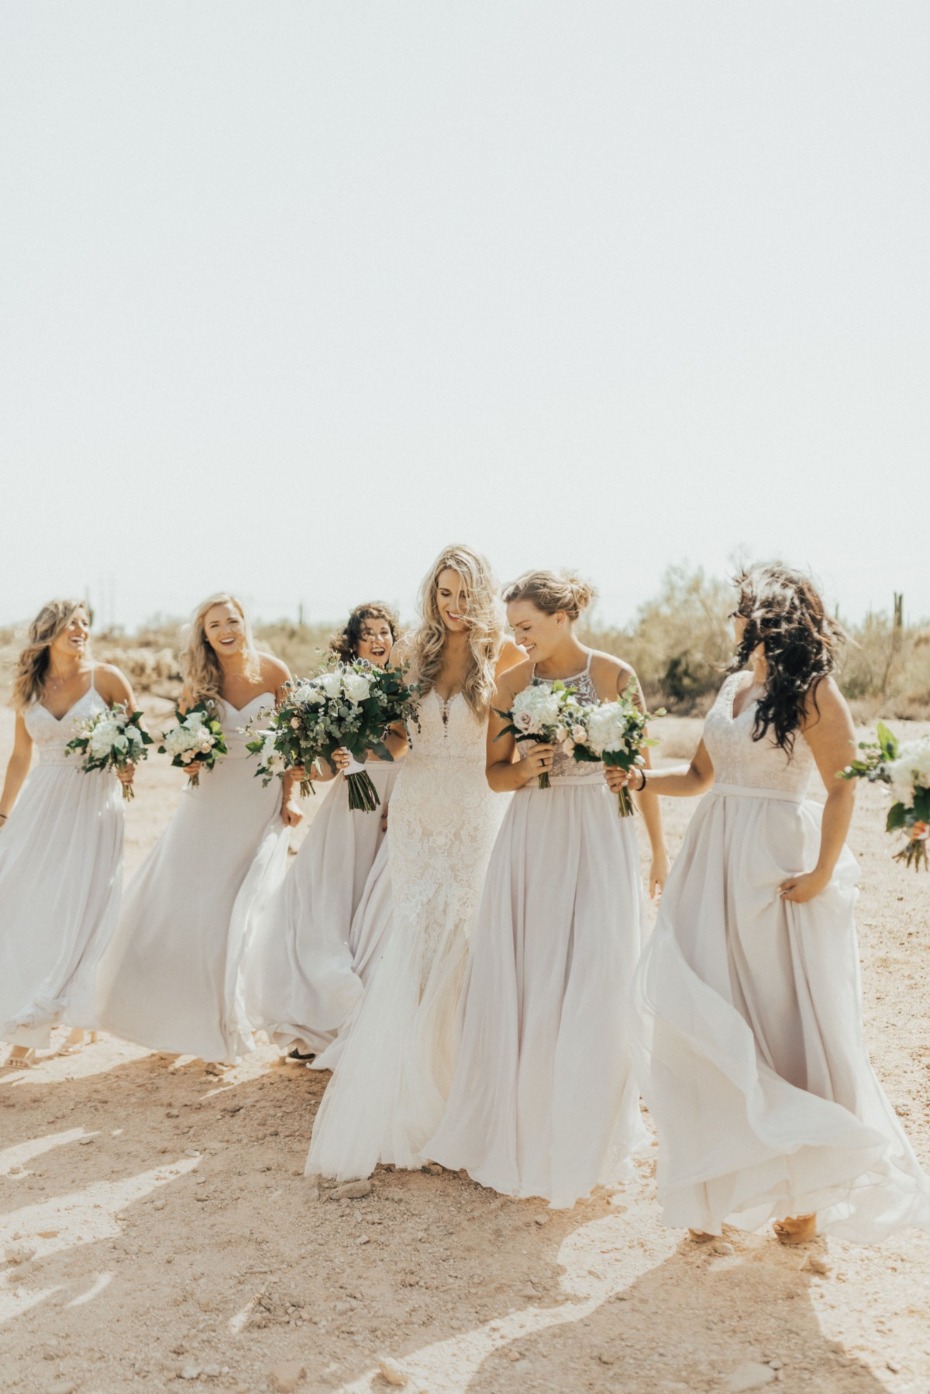 Bridal party tips to stay in your budget